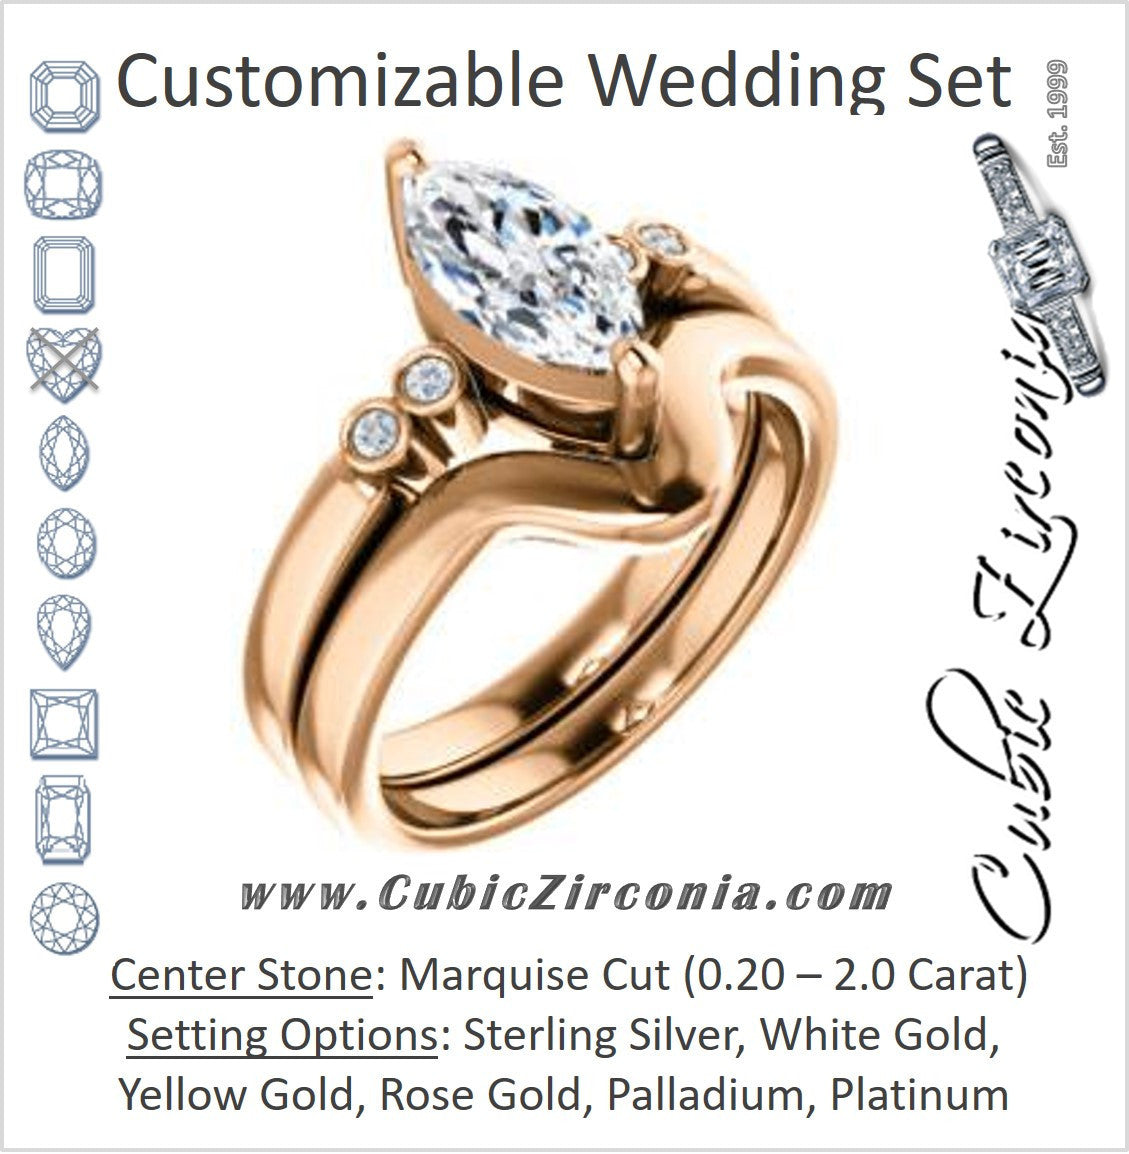 CZ Wedding Set, featuring The Luzella engagement ring (Customizable 5-stone Design with Marquise Cut Center and Round Bezel Accents)